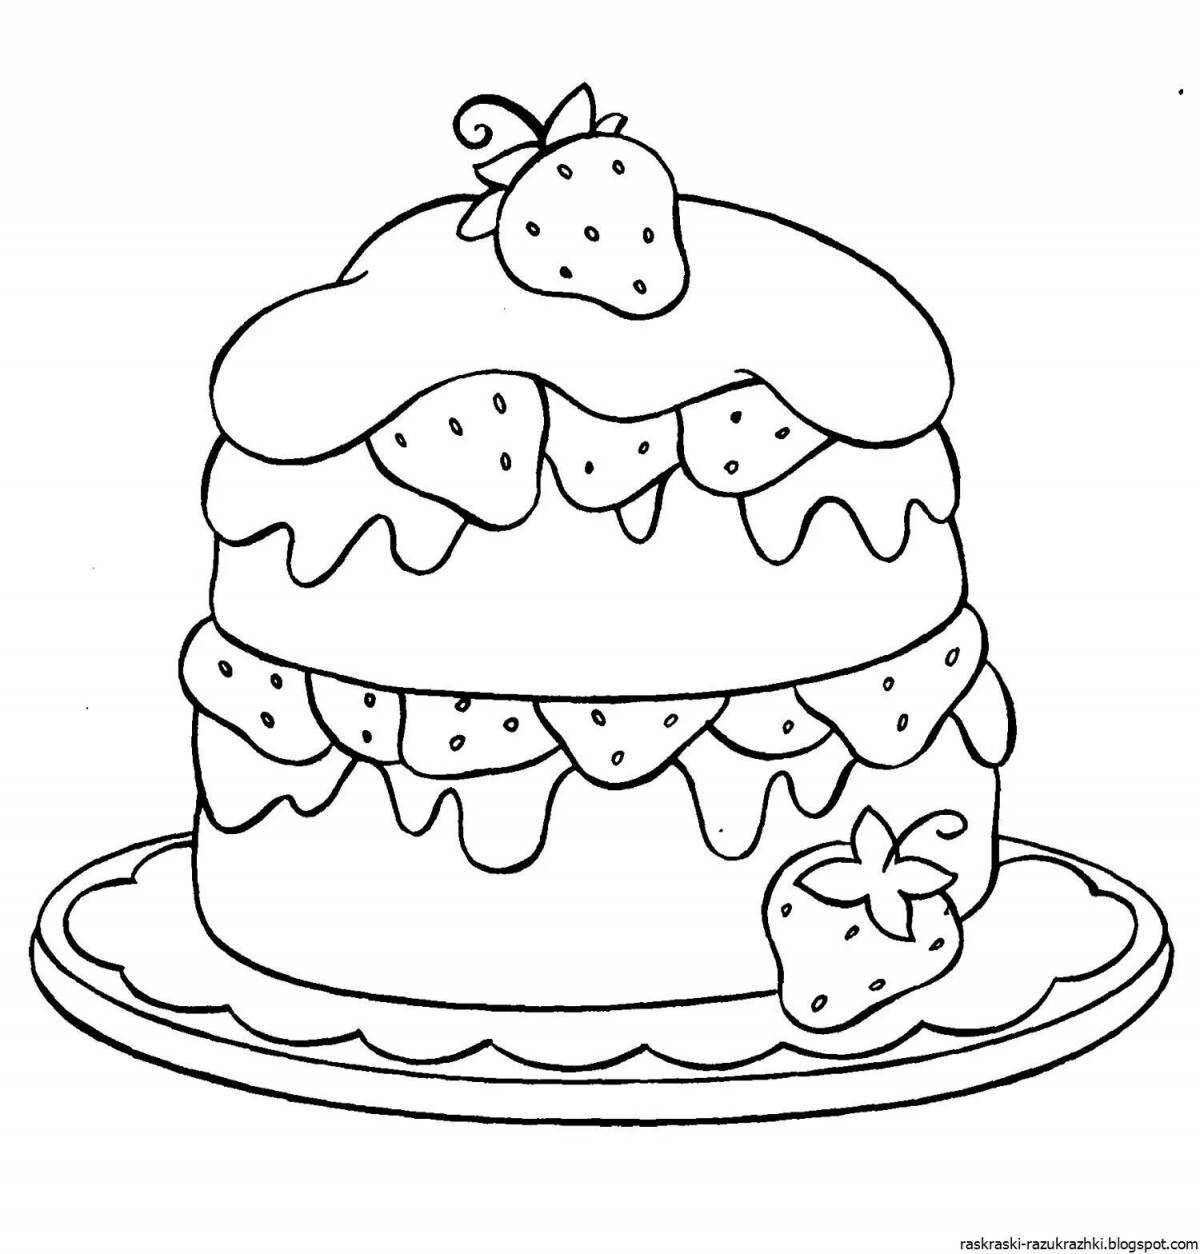 Coloring cakes for children aged 5-6